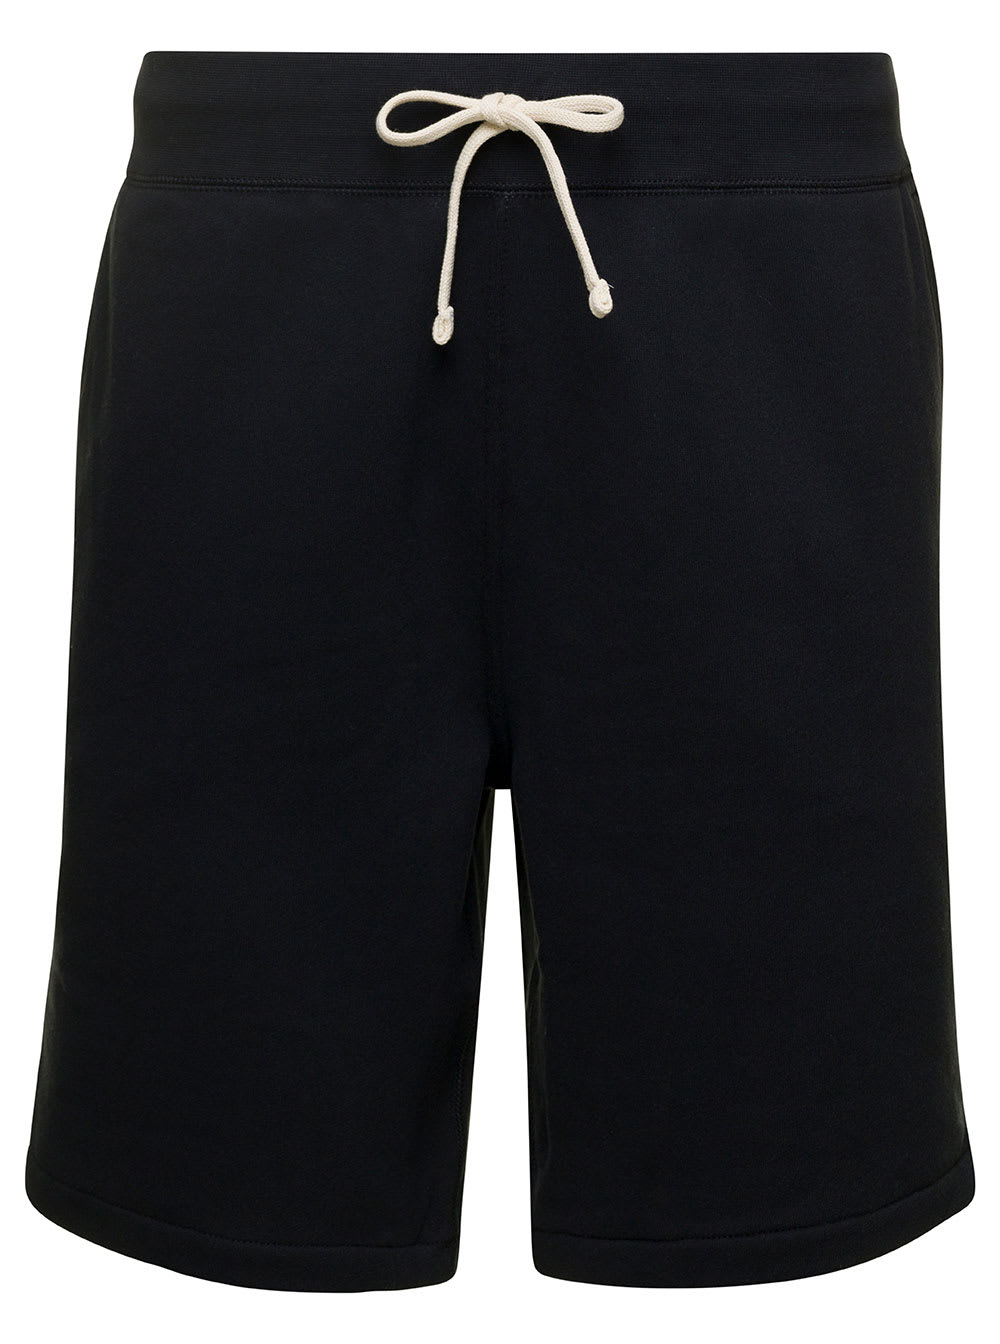 Polo Ralph Lauren Black Shorts With Drawstring With Embroidered Logo In Cotton Blend Man